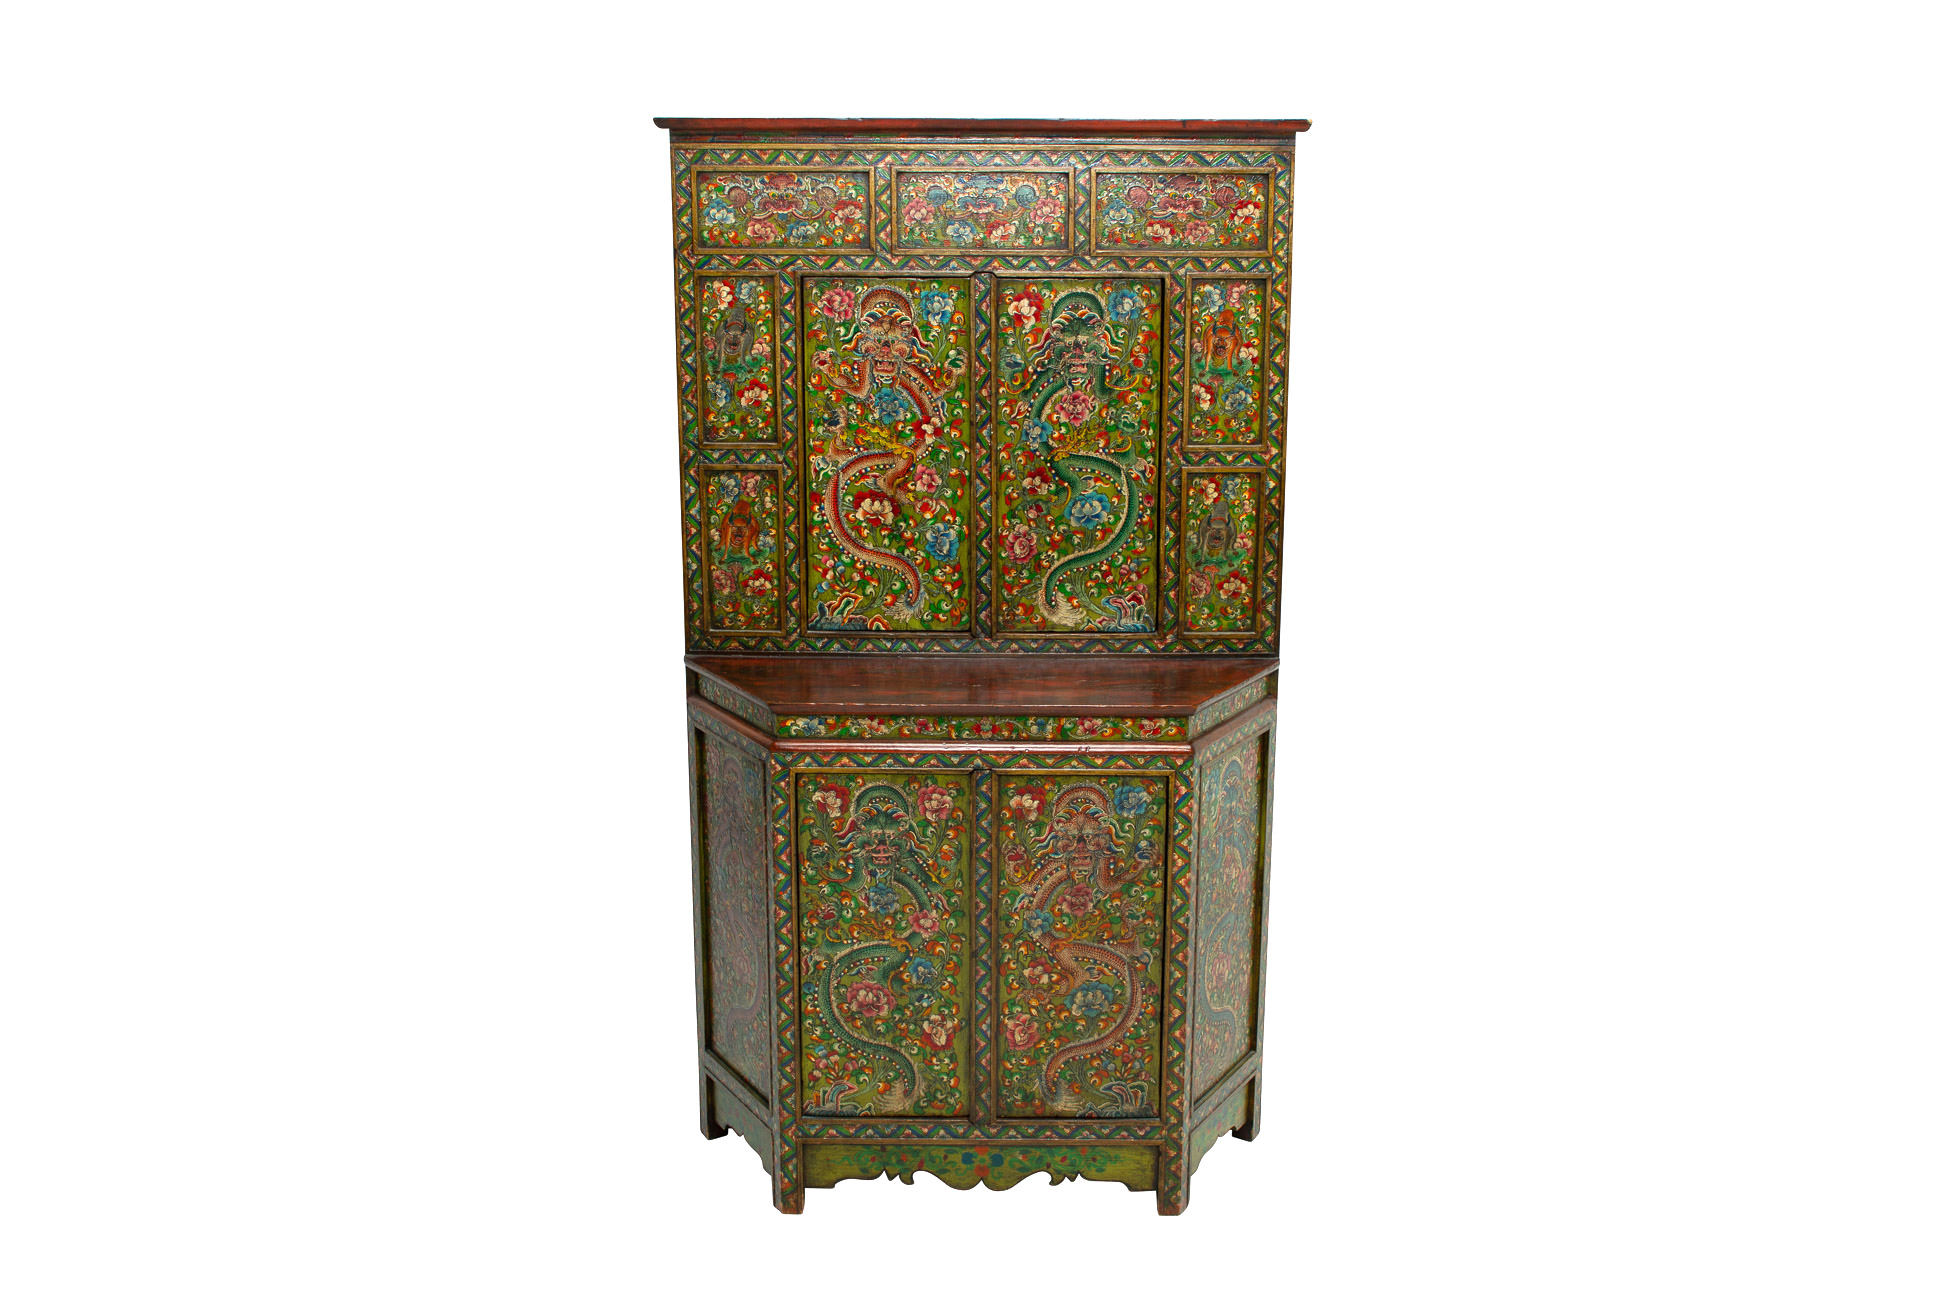 A TIBETAN POLYCHROME DECORATED CABINET - Image 2 of 3